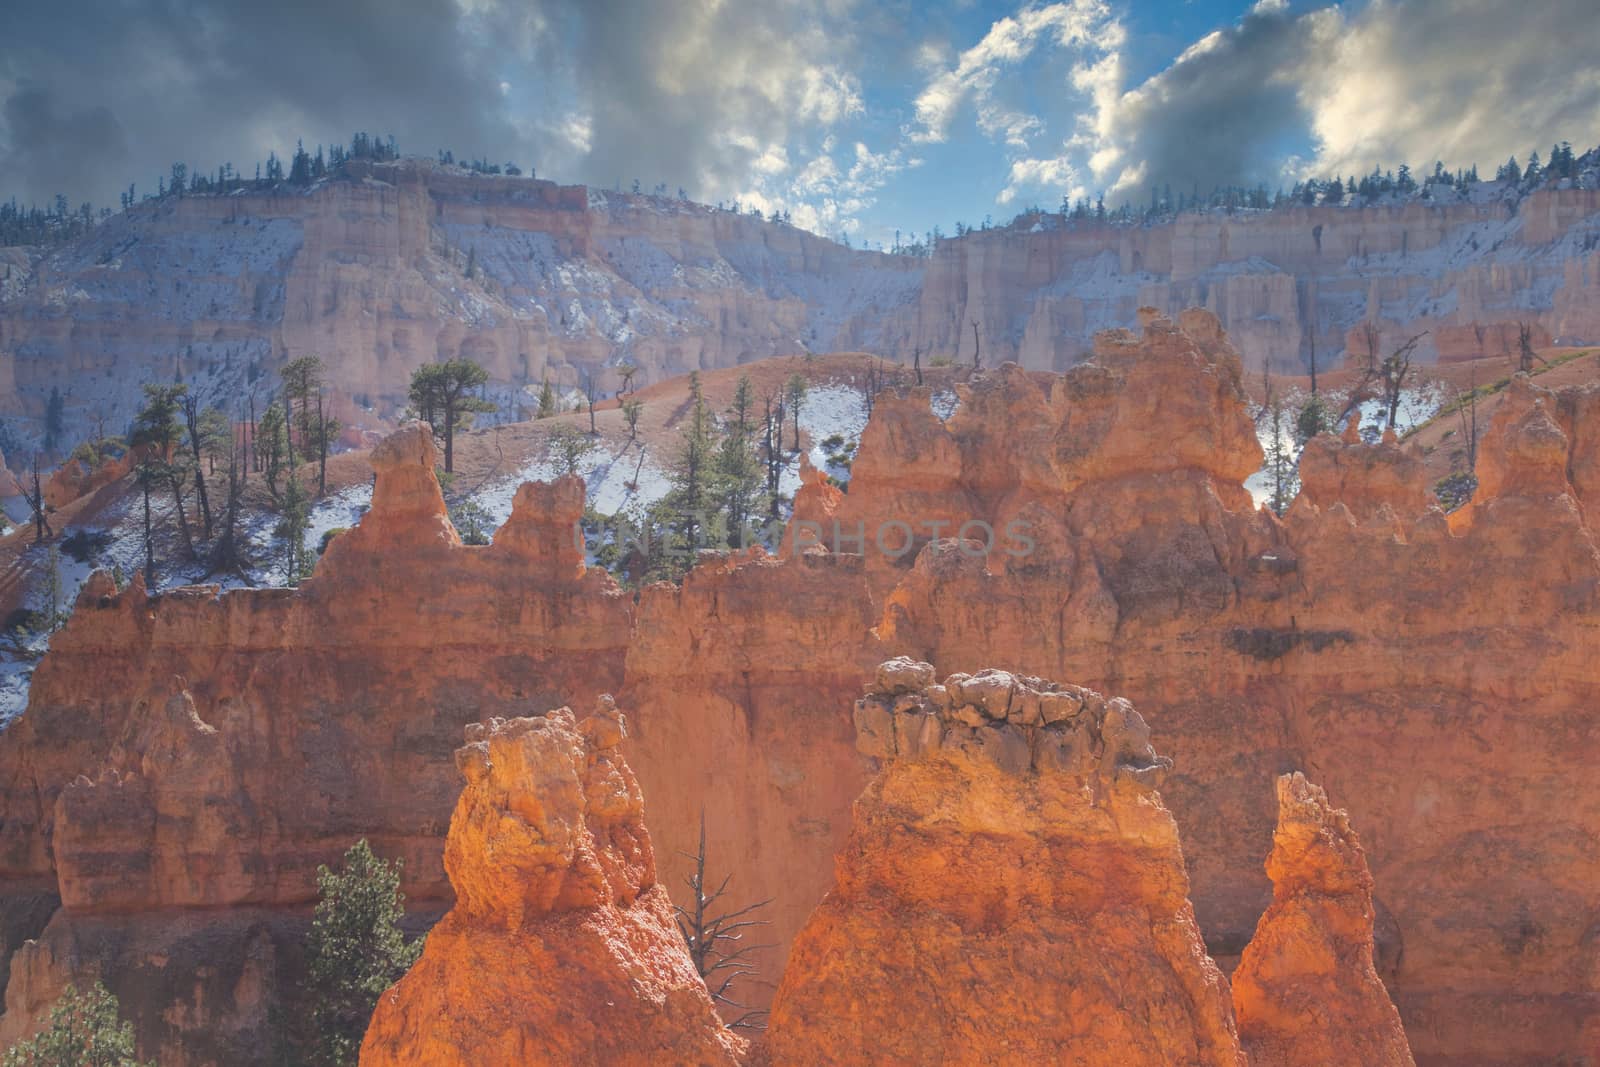 Bryce canyon national park in Utah. Travel and tourism.